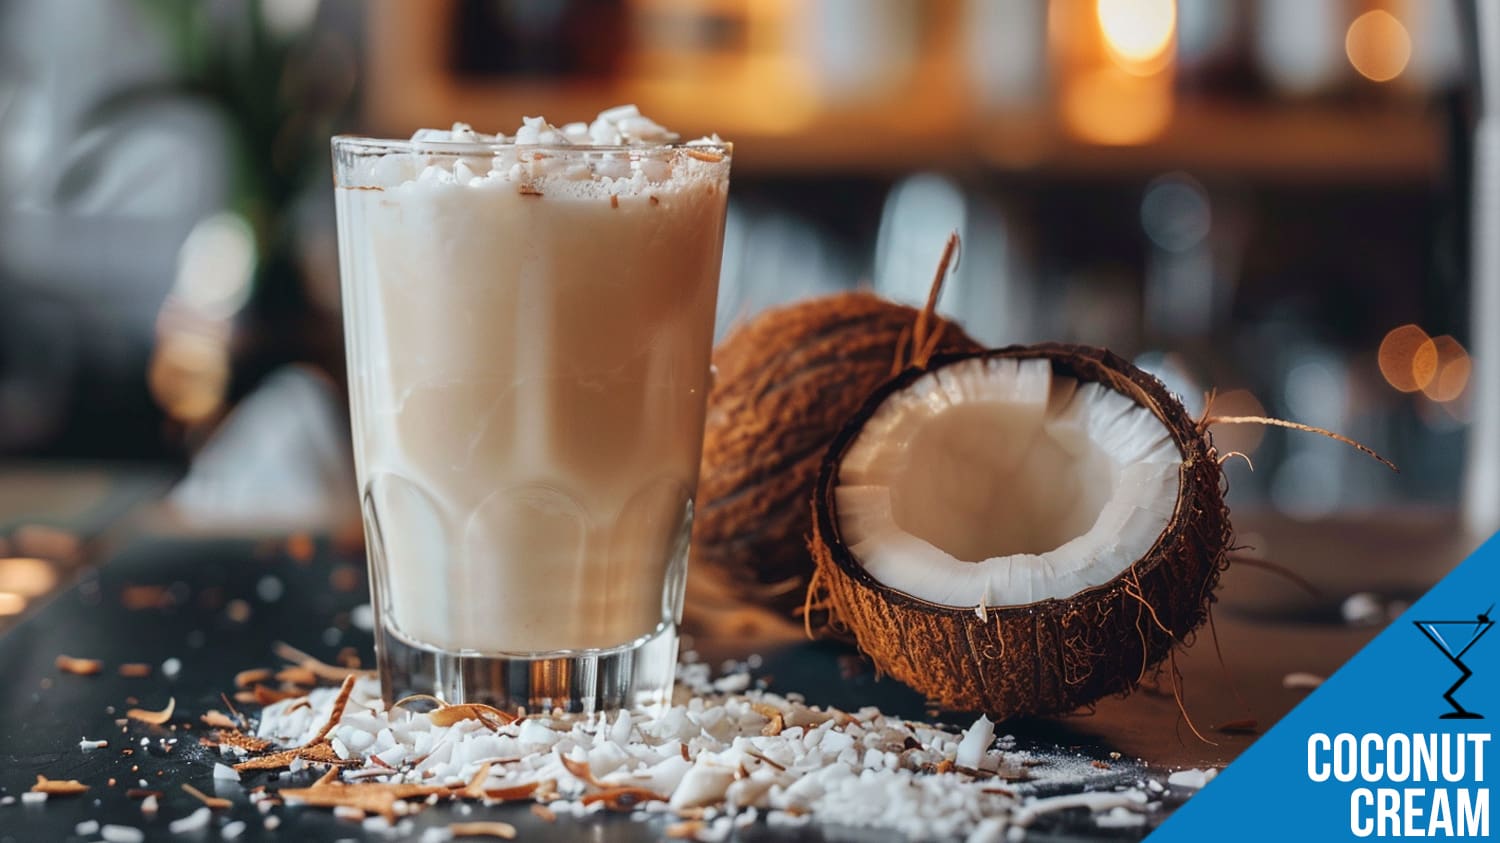 Best Coconut Cream Cocktails: Tropical Recipes, Flavors, and Top Brands